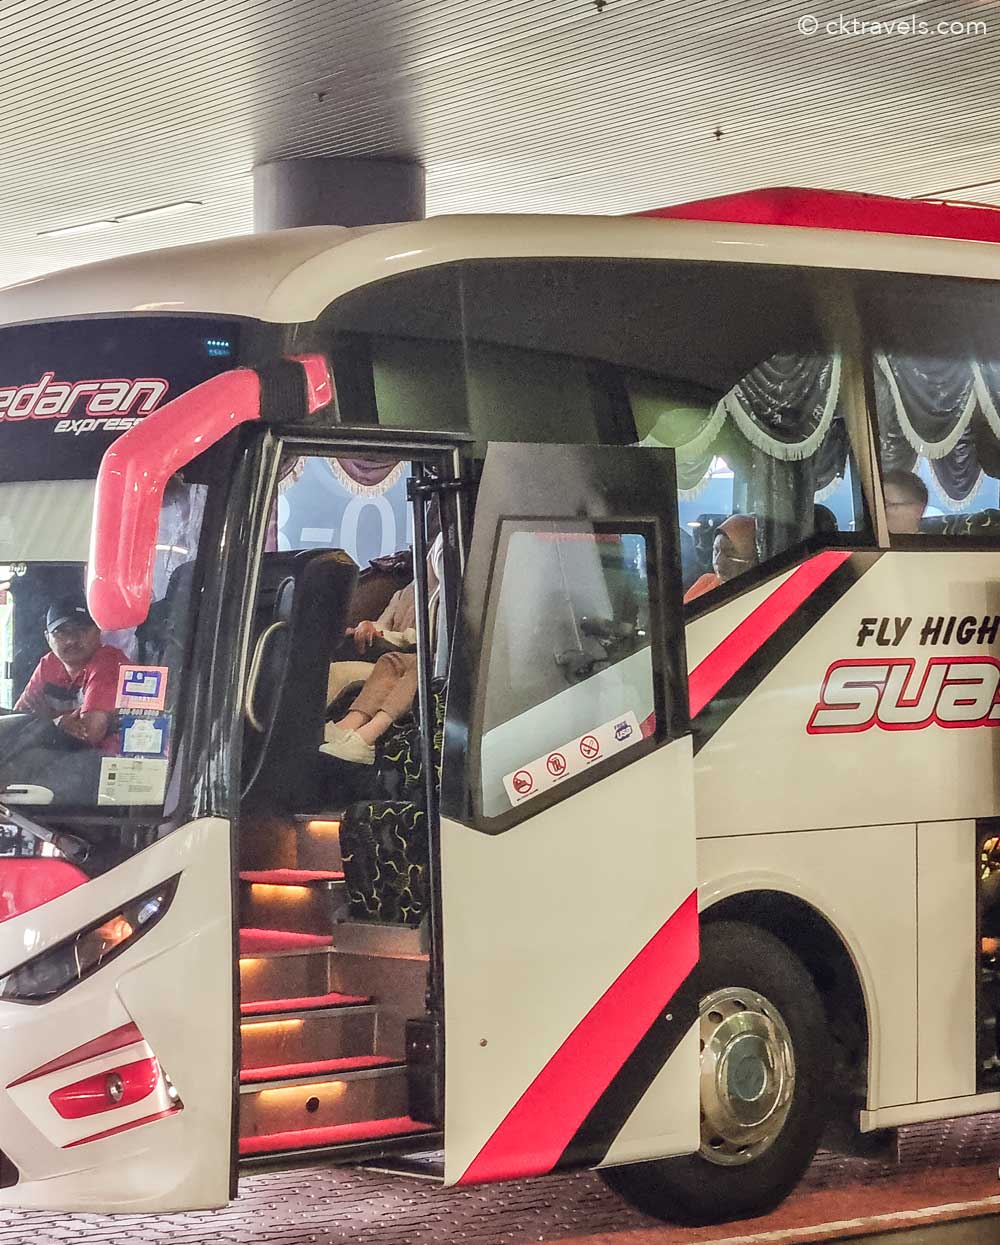 How to get from Kuala Lumpur Airport to the City by bus